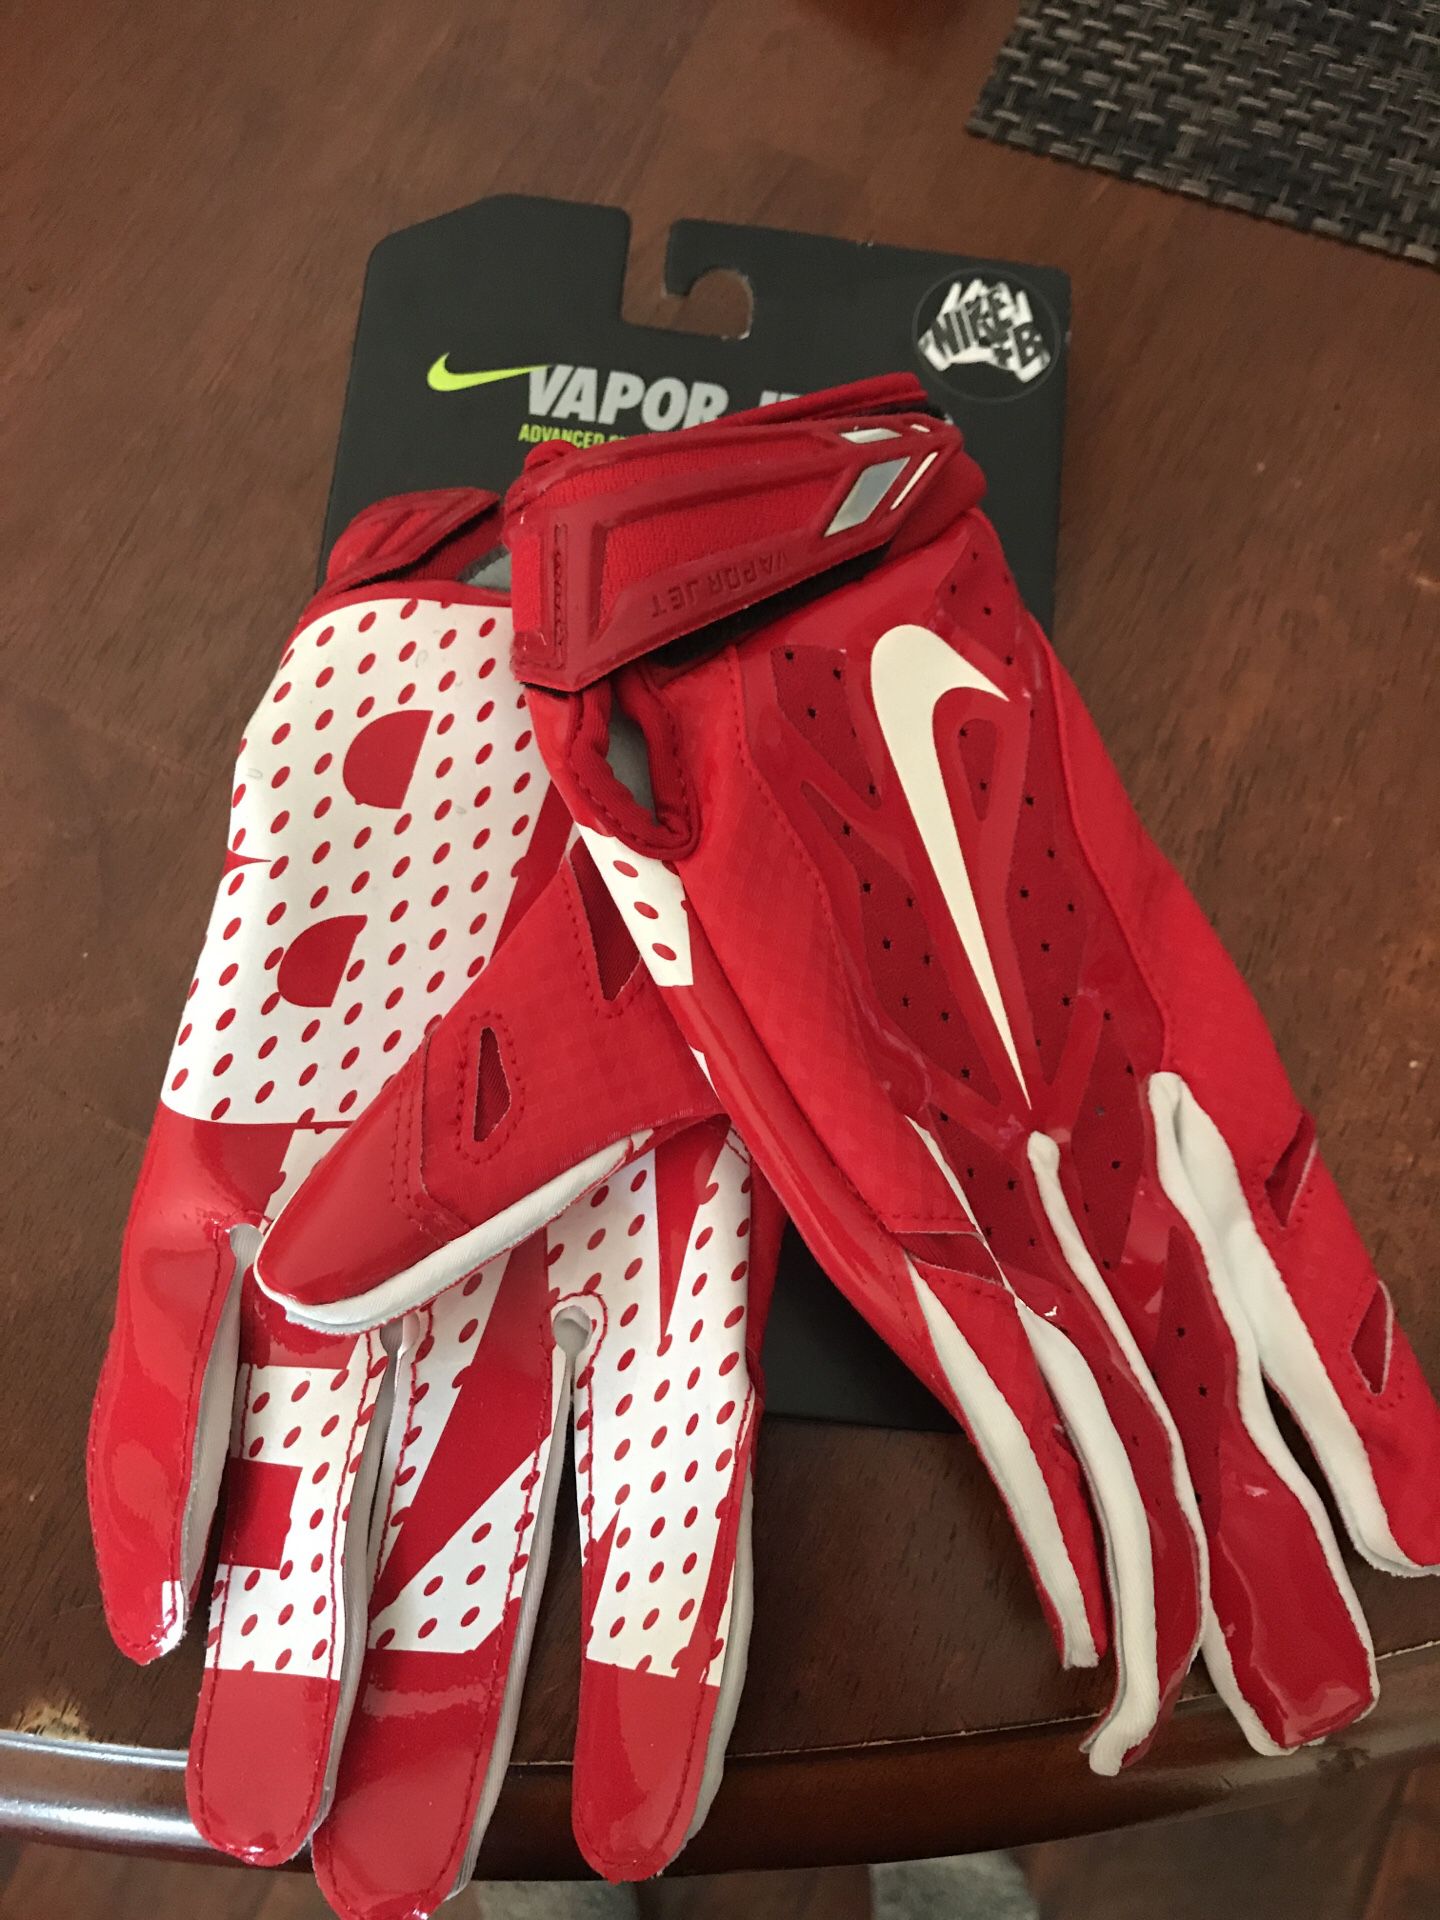 ontploffing Indirect Statistisch Red Nike Viper Jet 3.0 football gloves for Sale in Tustin, CA - OfferUp